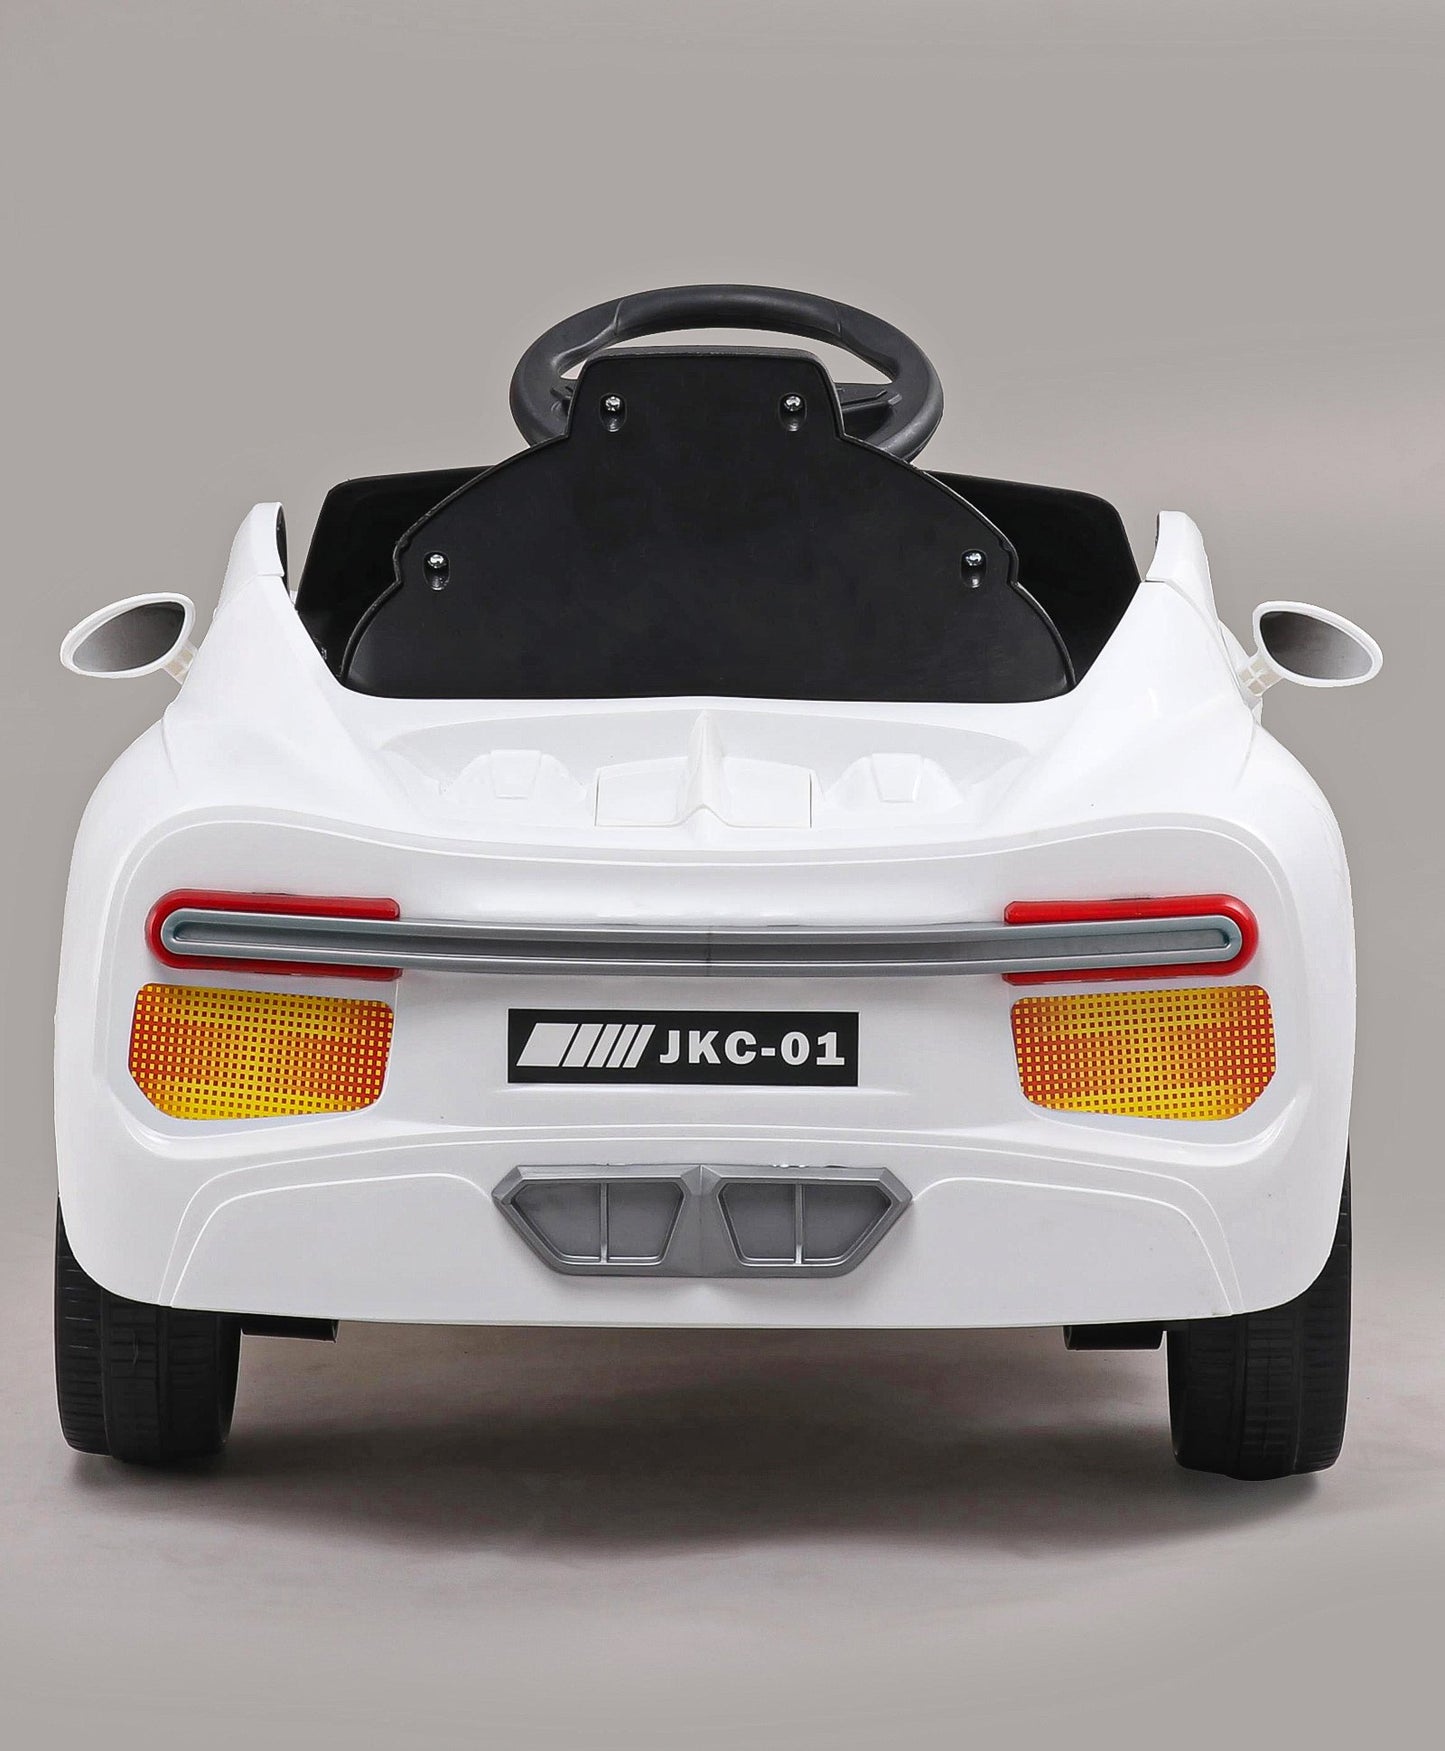 Babyhug Battery Operated Small Ride On Car with Scissor Doors, Music, and Lights - White | Fun and Safe Toddler Electric Car for Outdoor and Indoor Play  &nbsp;